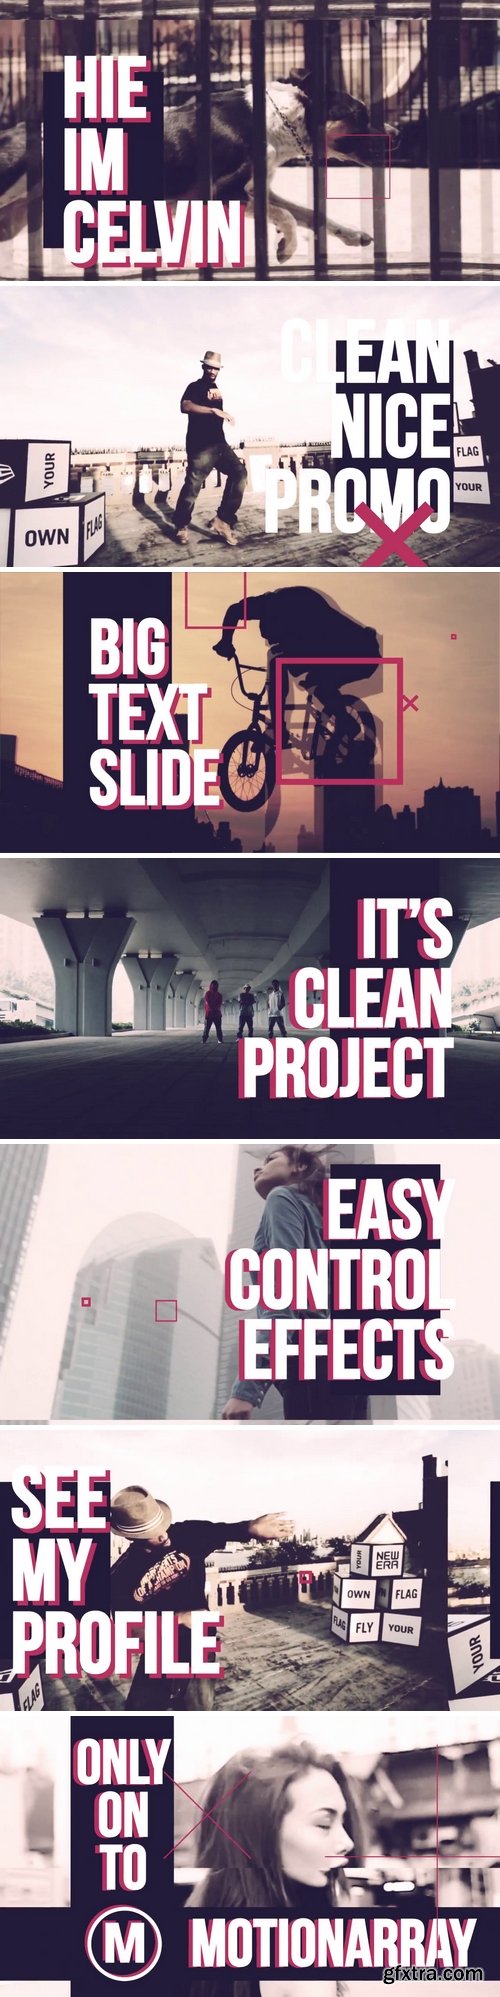 MotionArray - Big Texts Promo After Effects Templates 158116